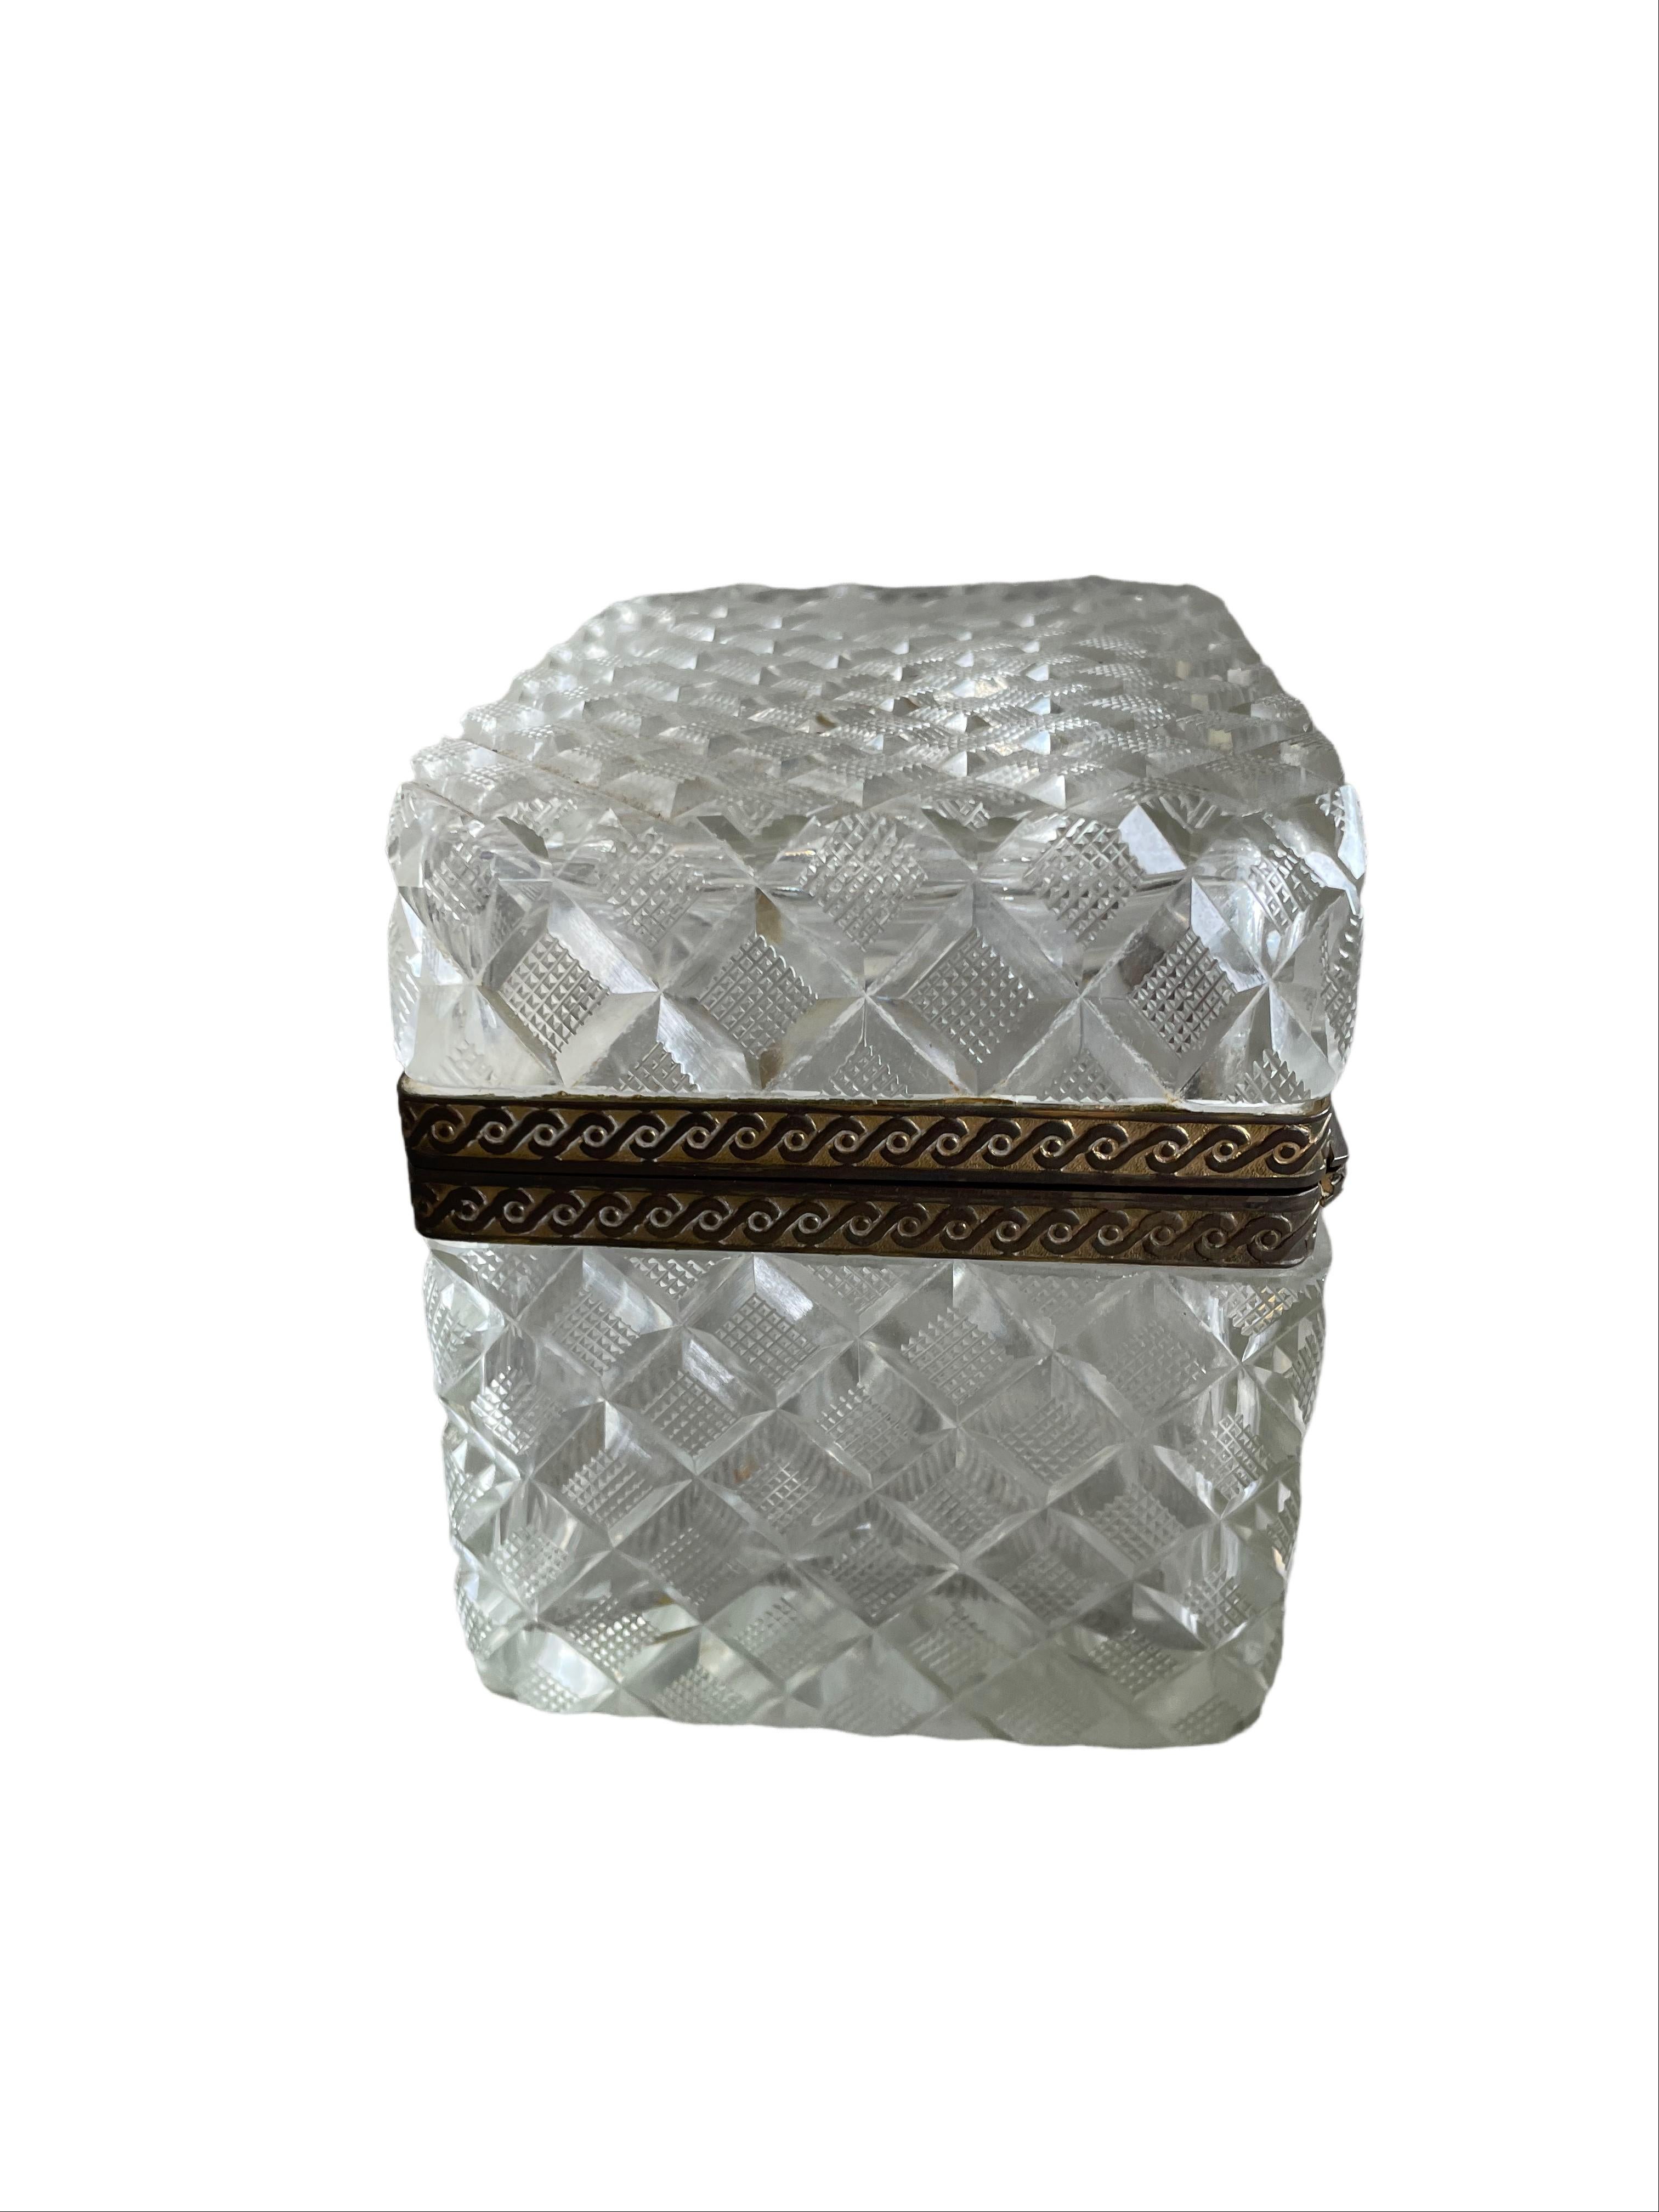 Louis XVI 19th Century Dore Bronze Mounted Cut Crystal Box For Sale